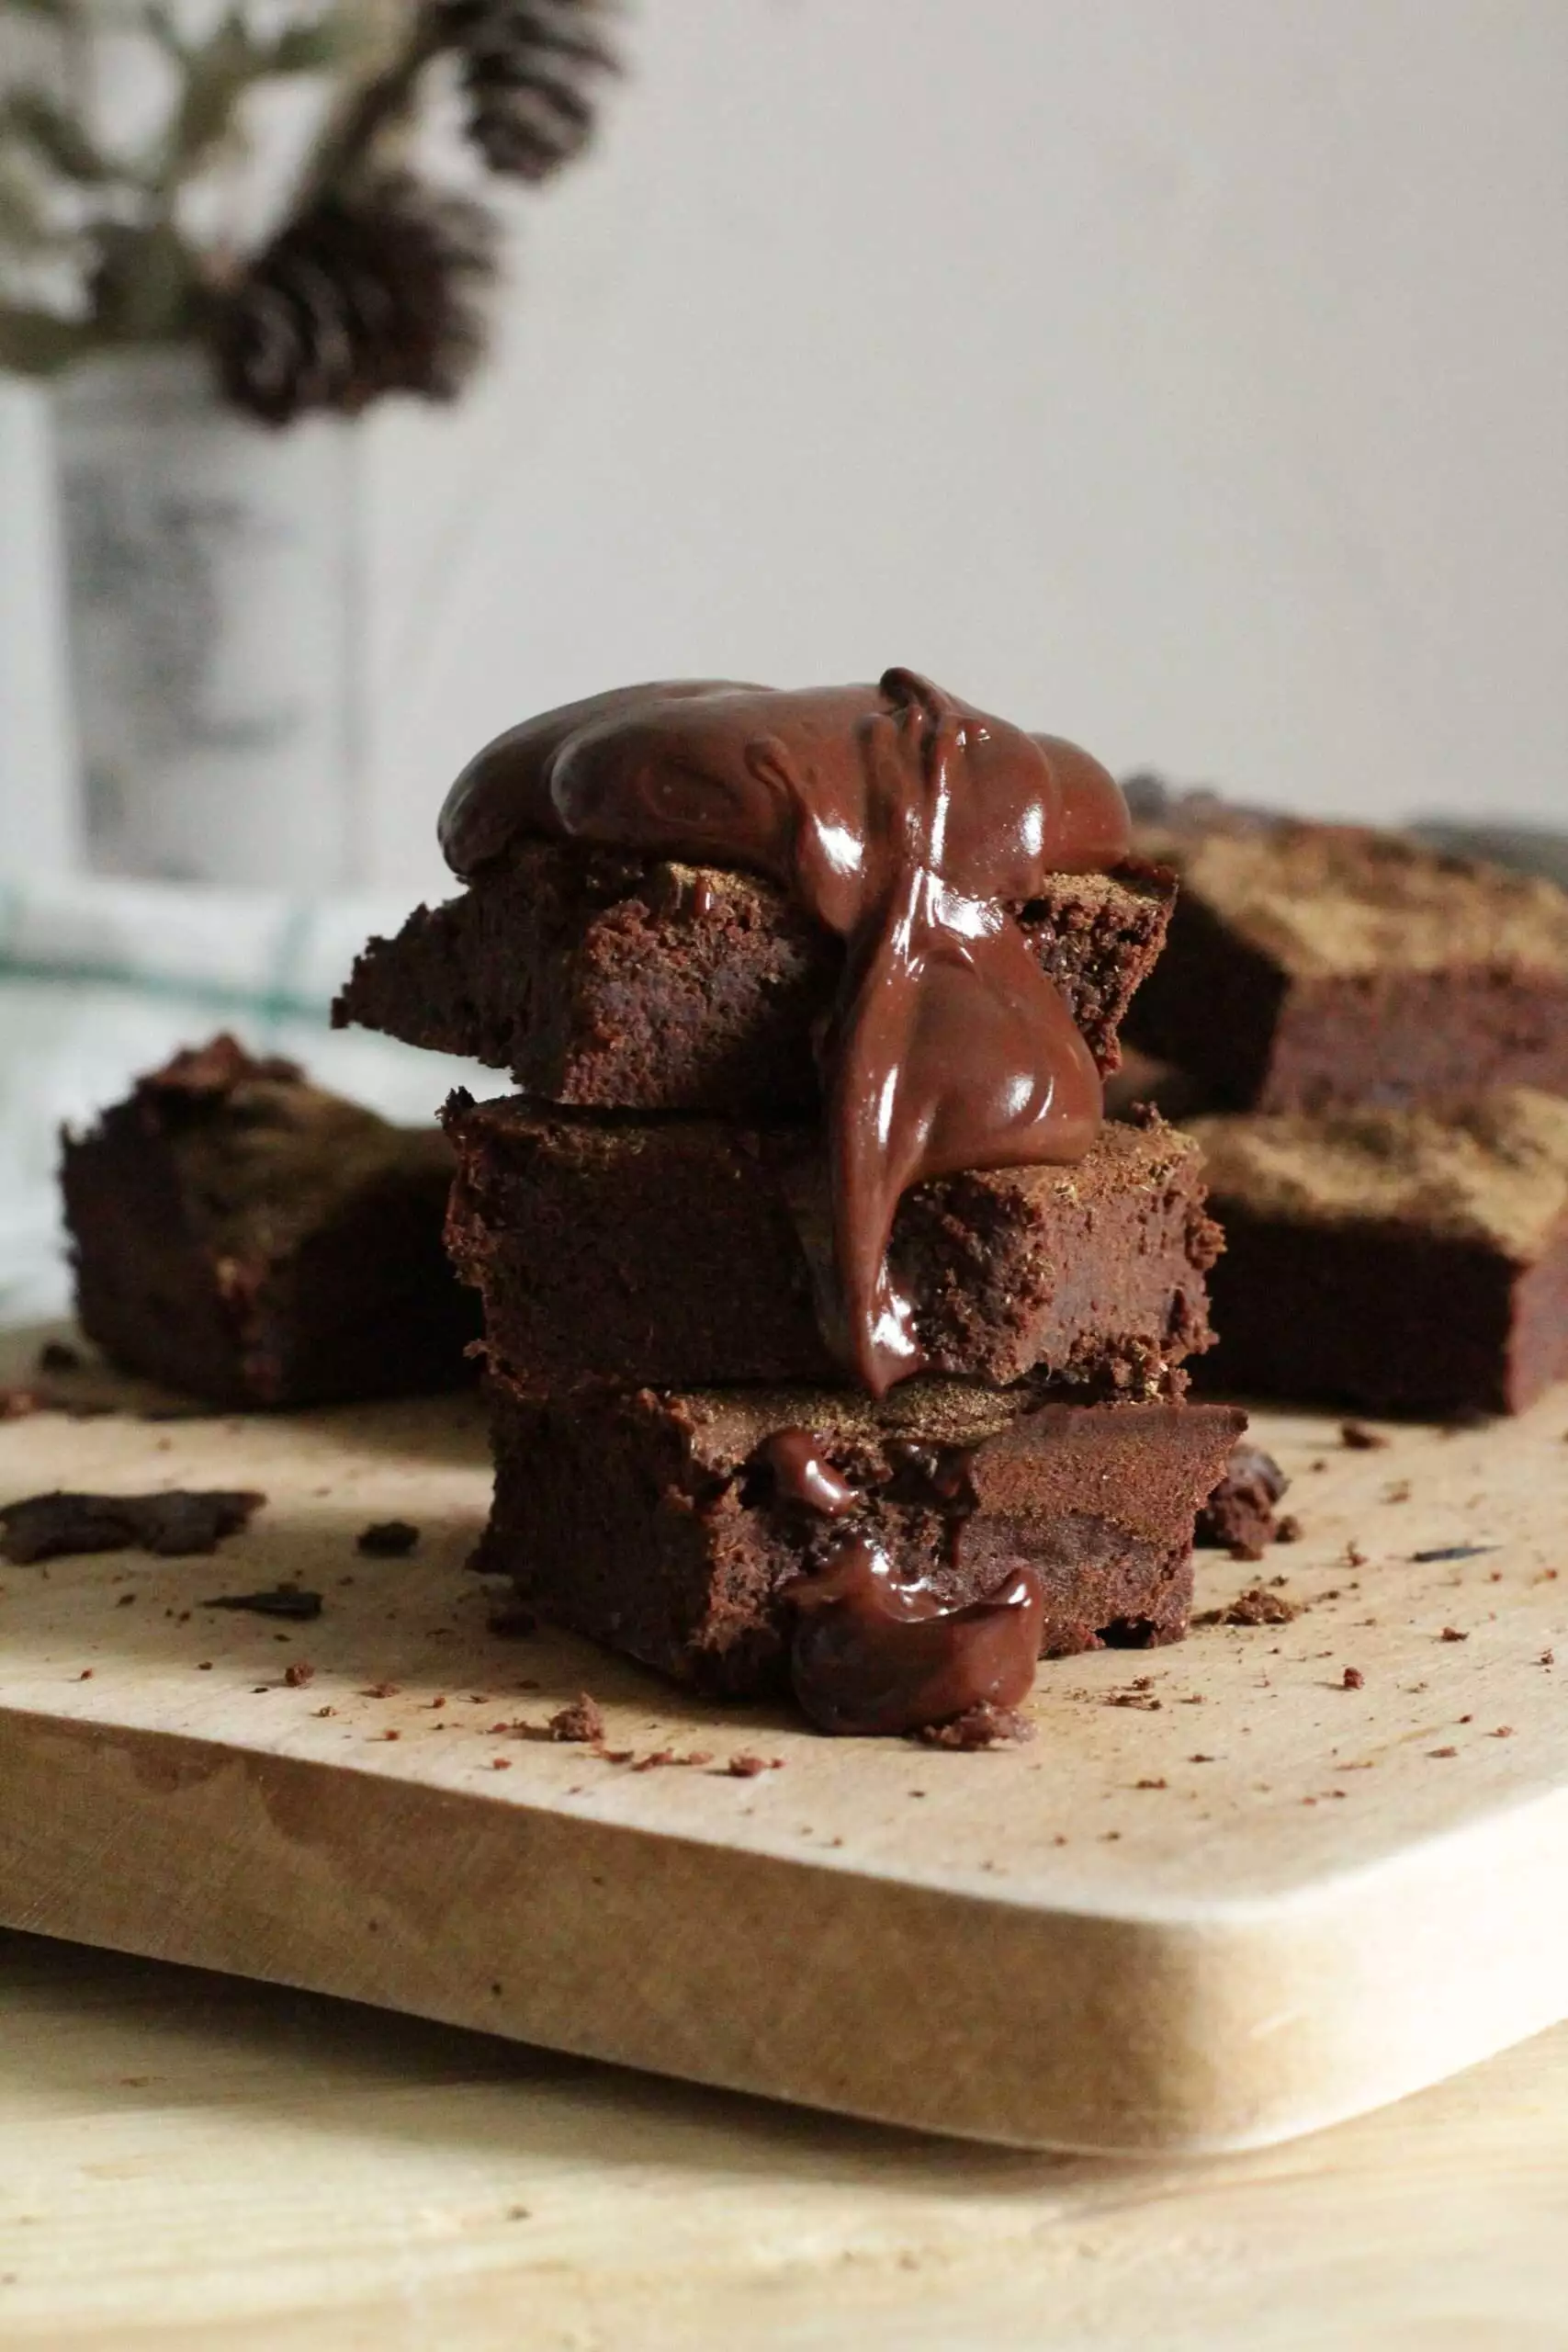 Recipes for brownies